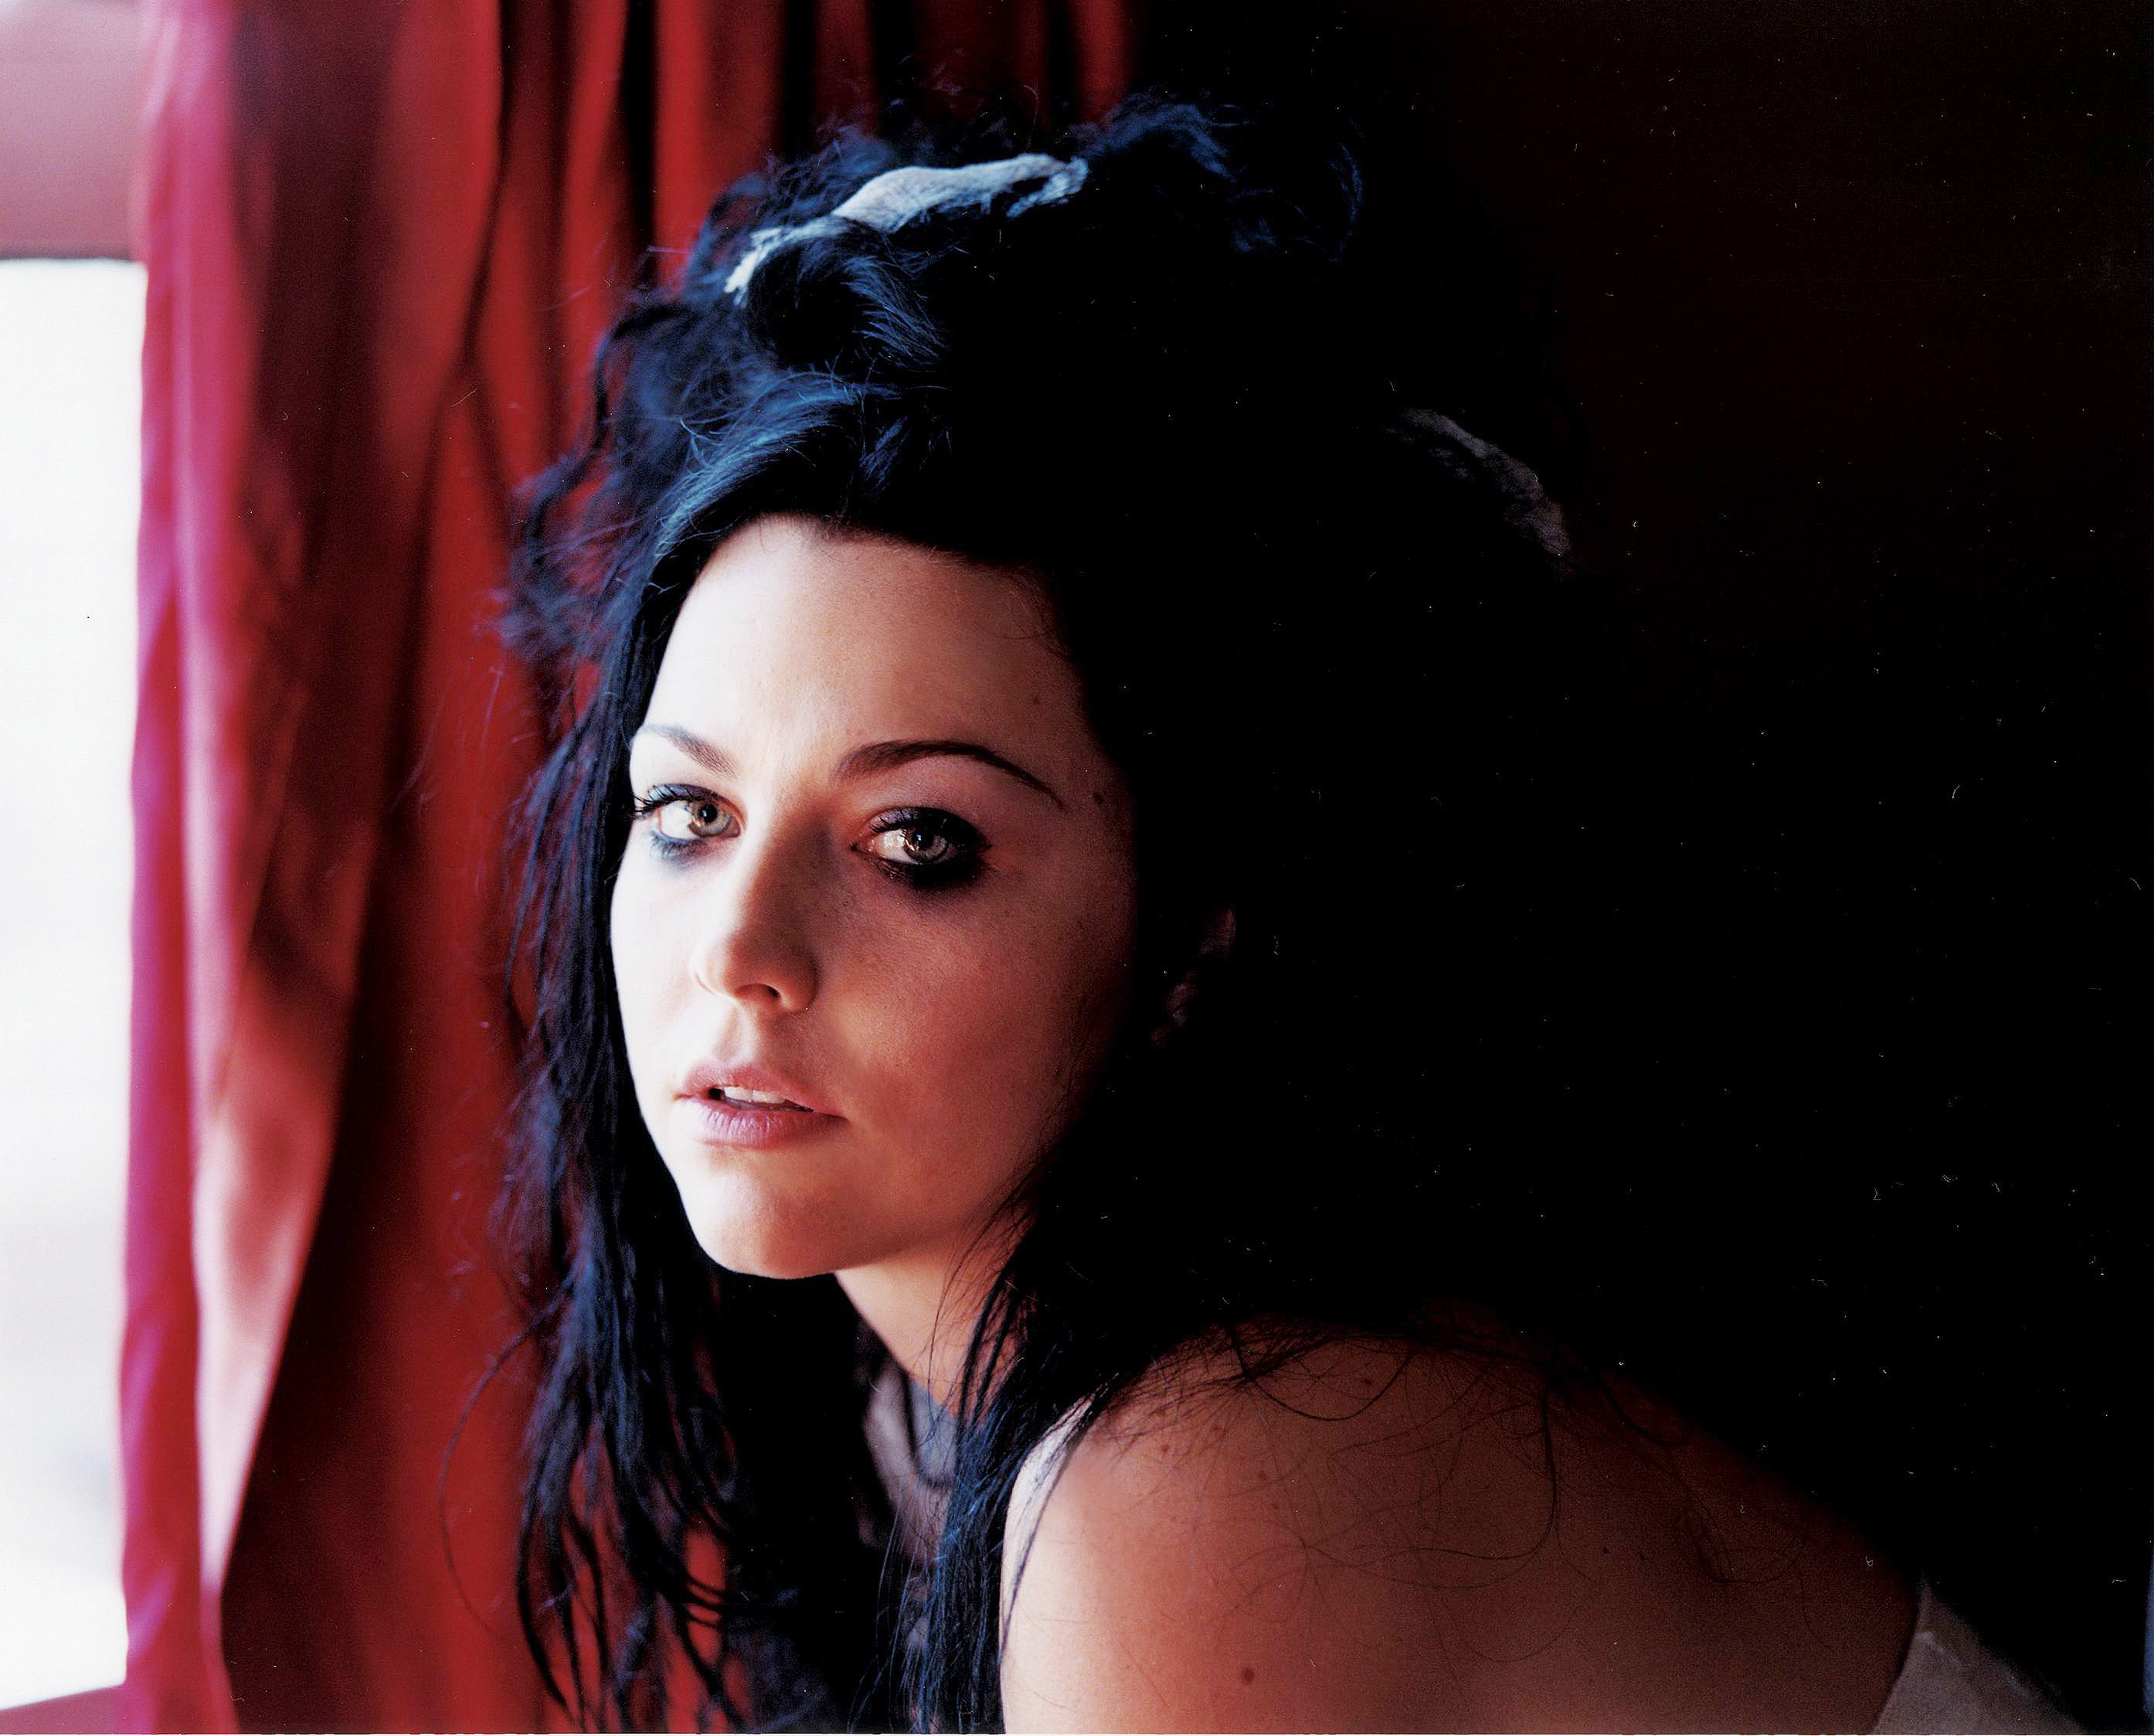 2788x2247
Keywords: anywhere but home;dvd;promo;photoshoot;amy lee